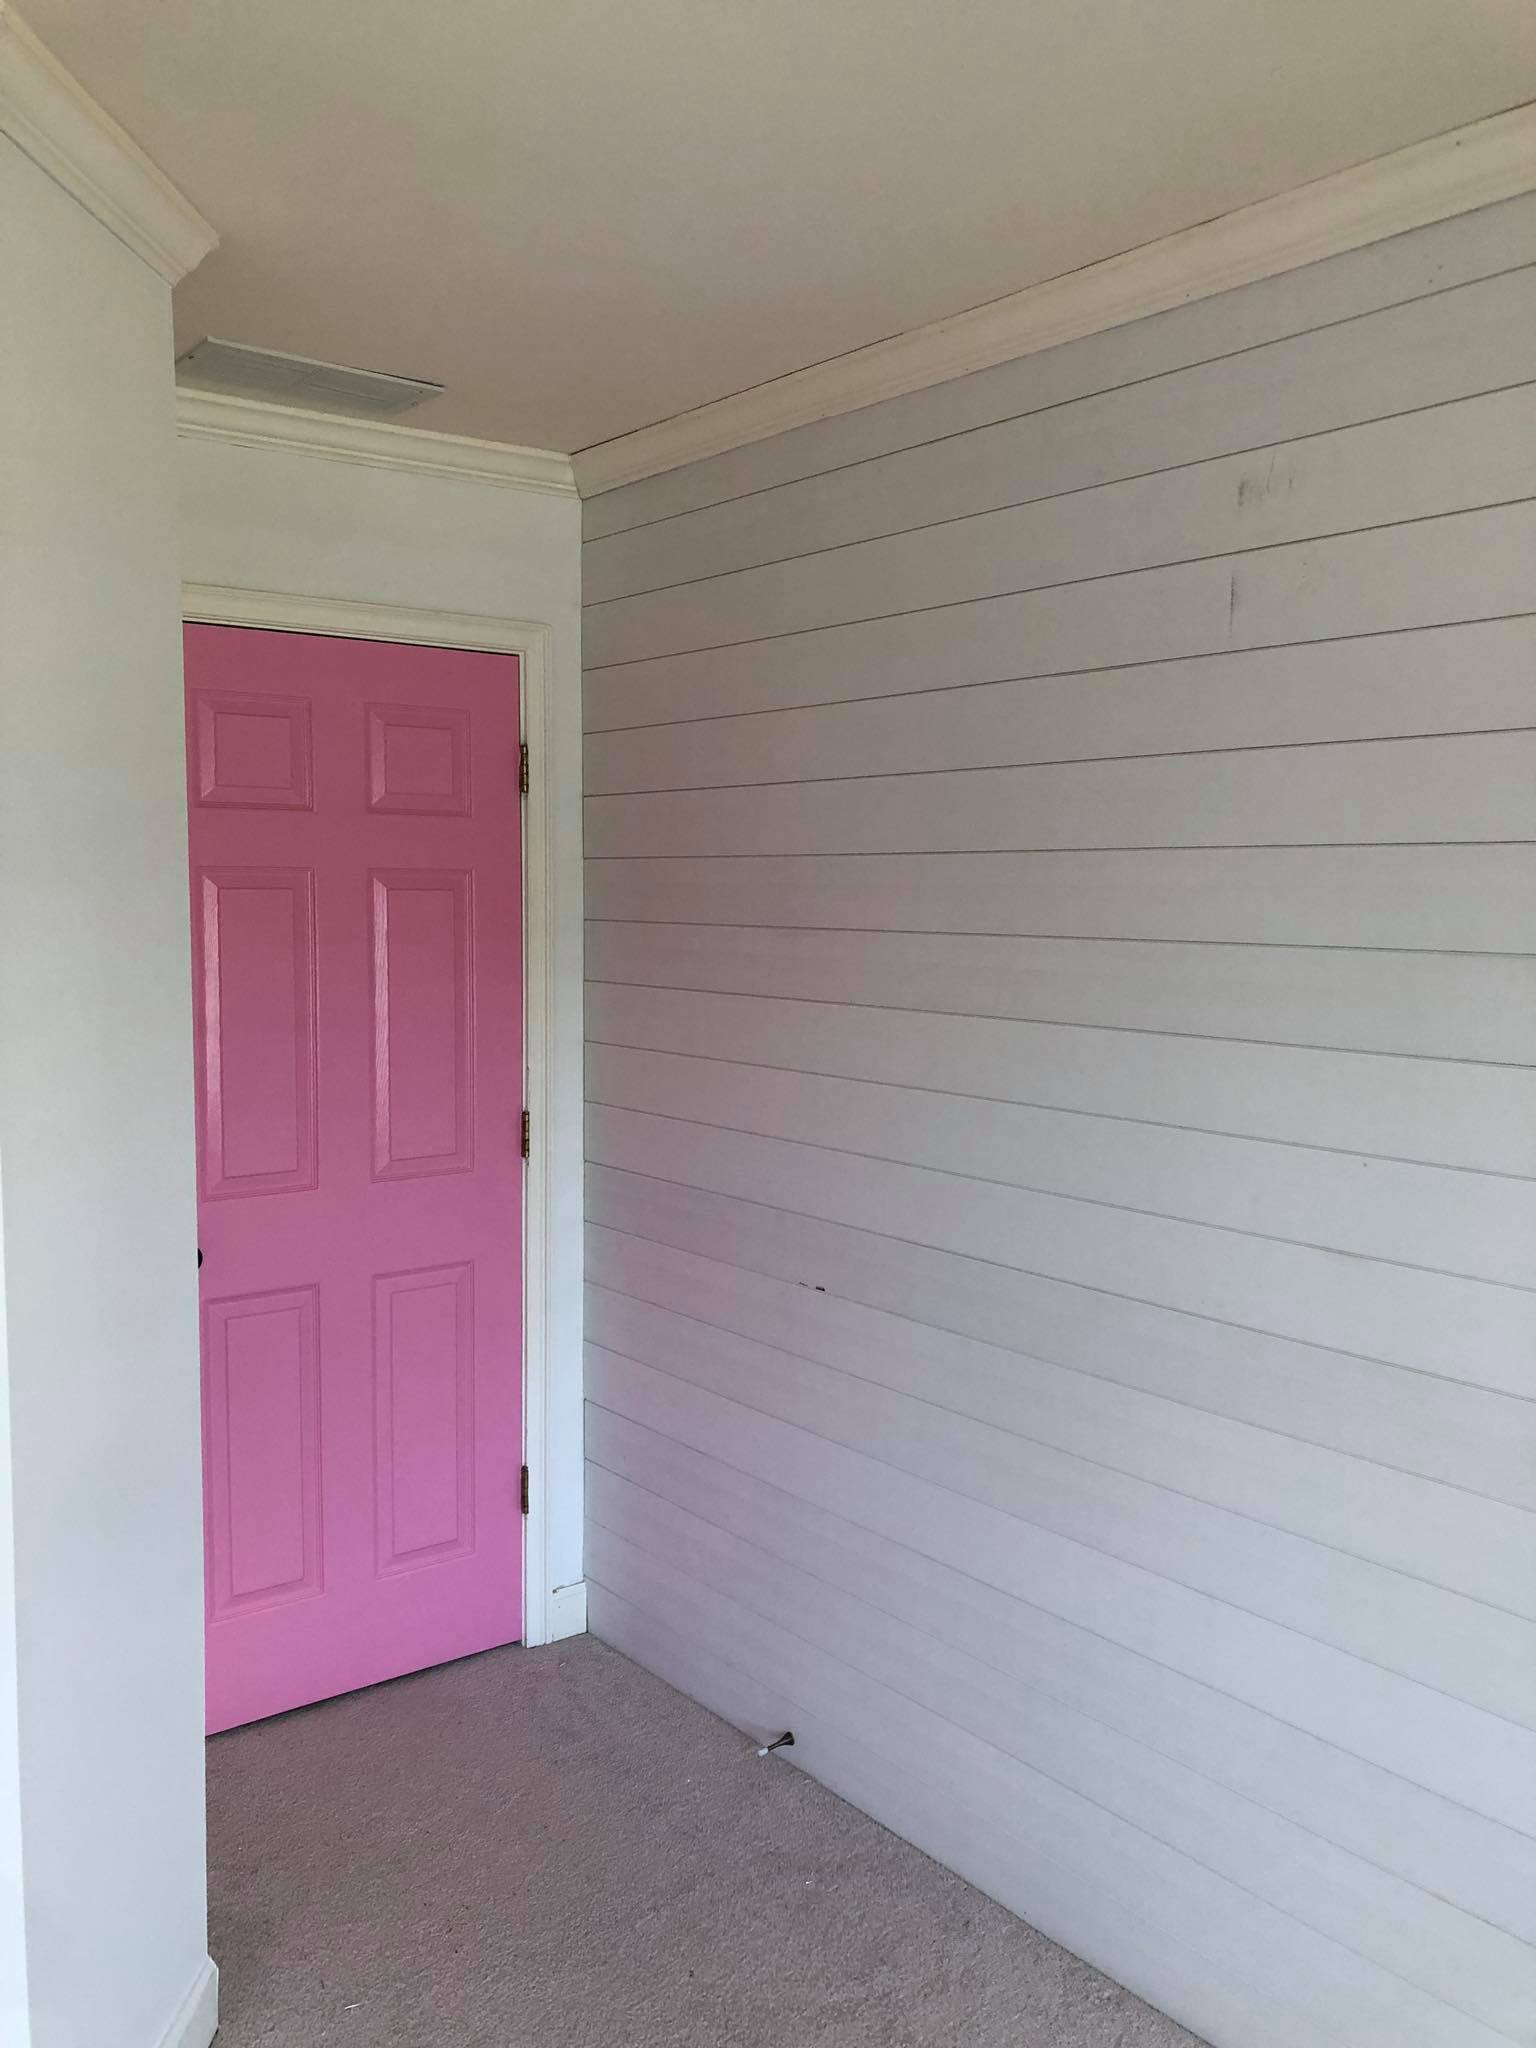 Complete Shiplap on Walls Installed 5